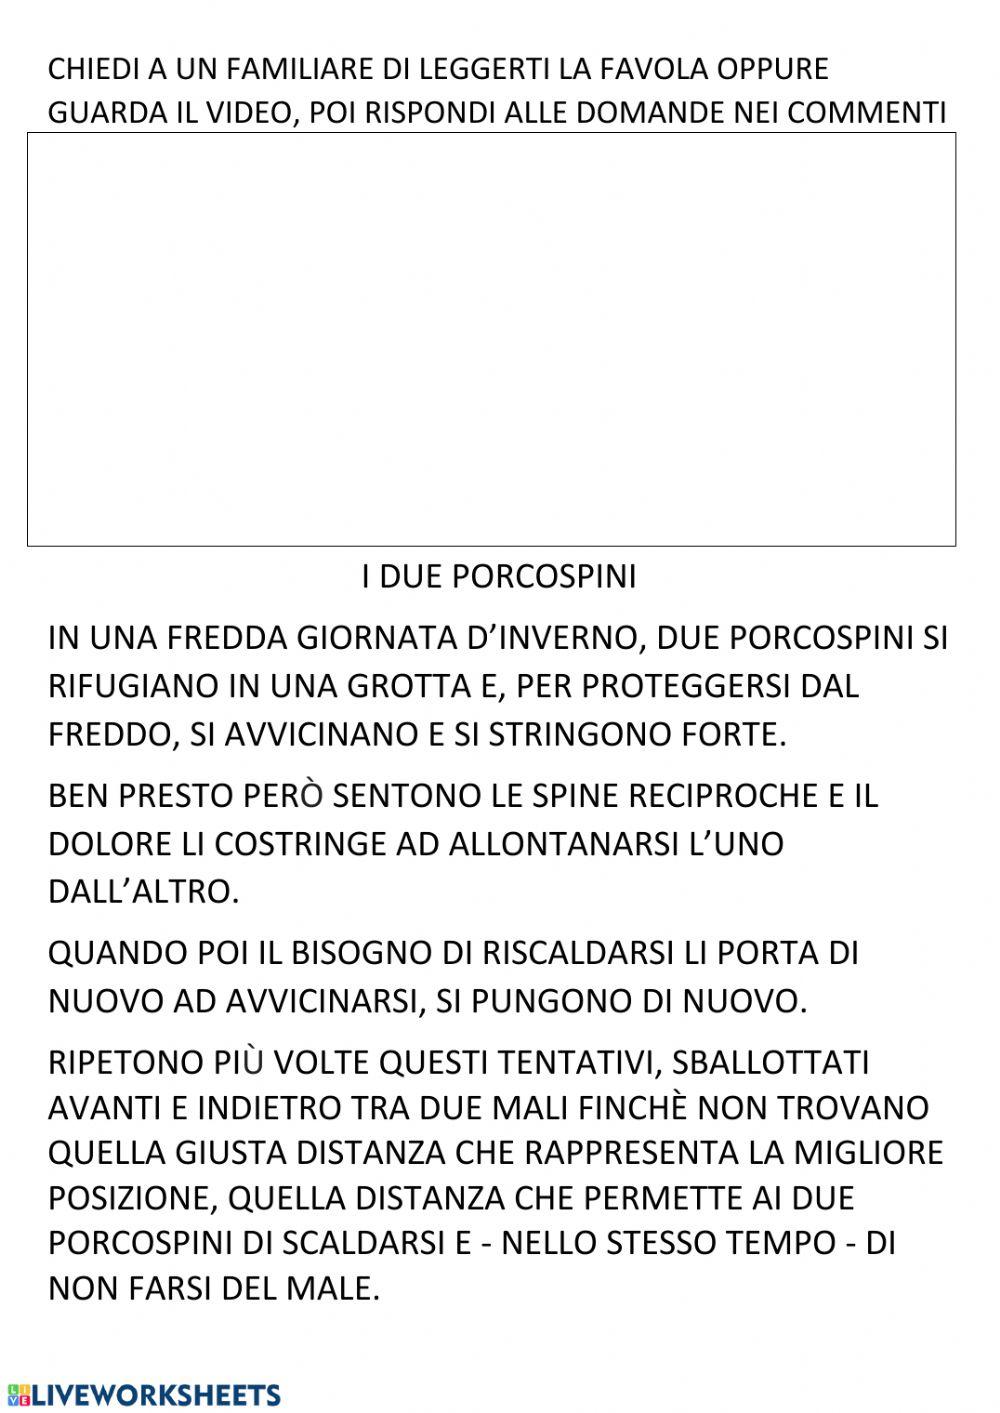 I due porcospini